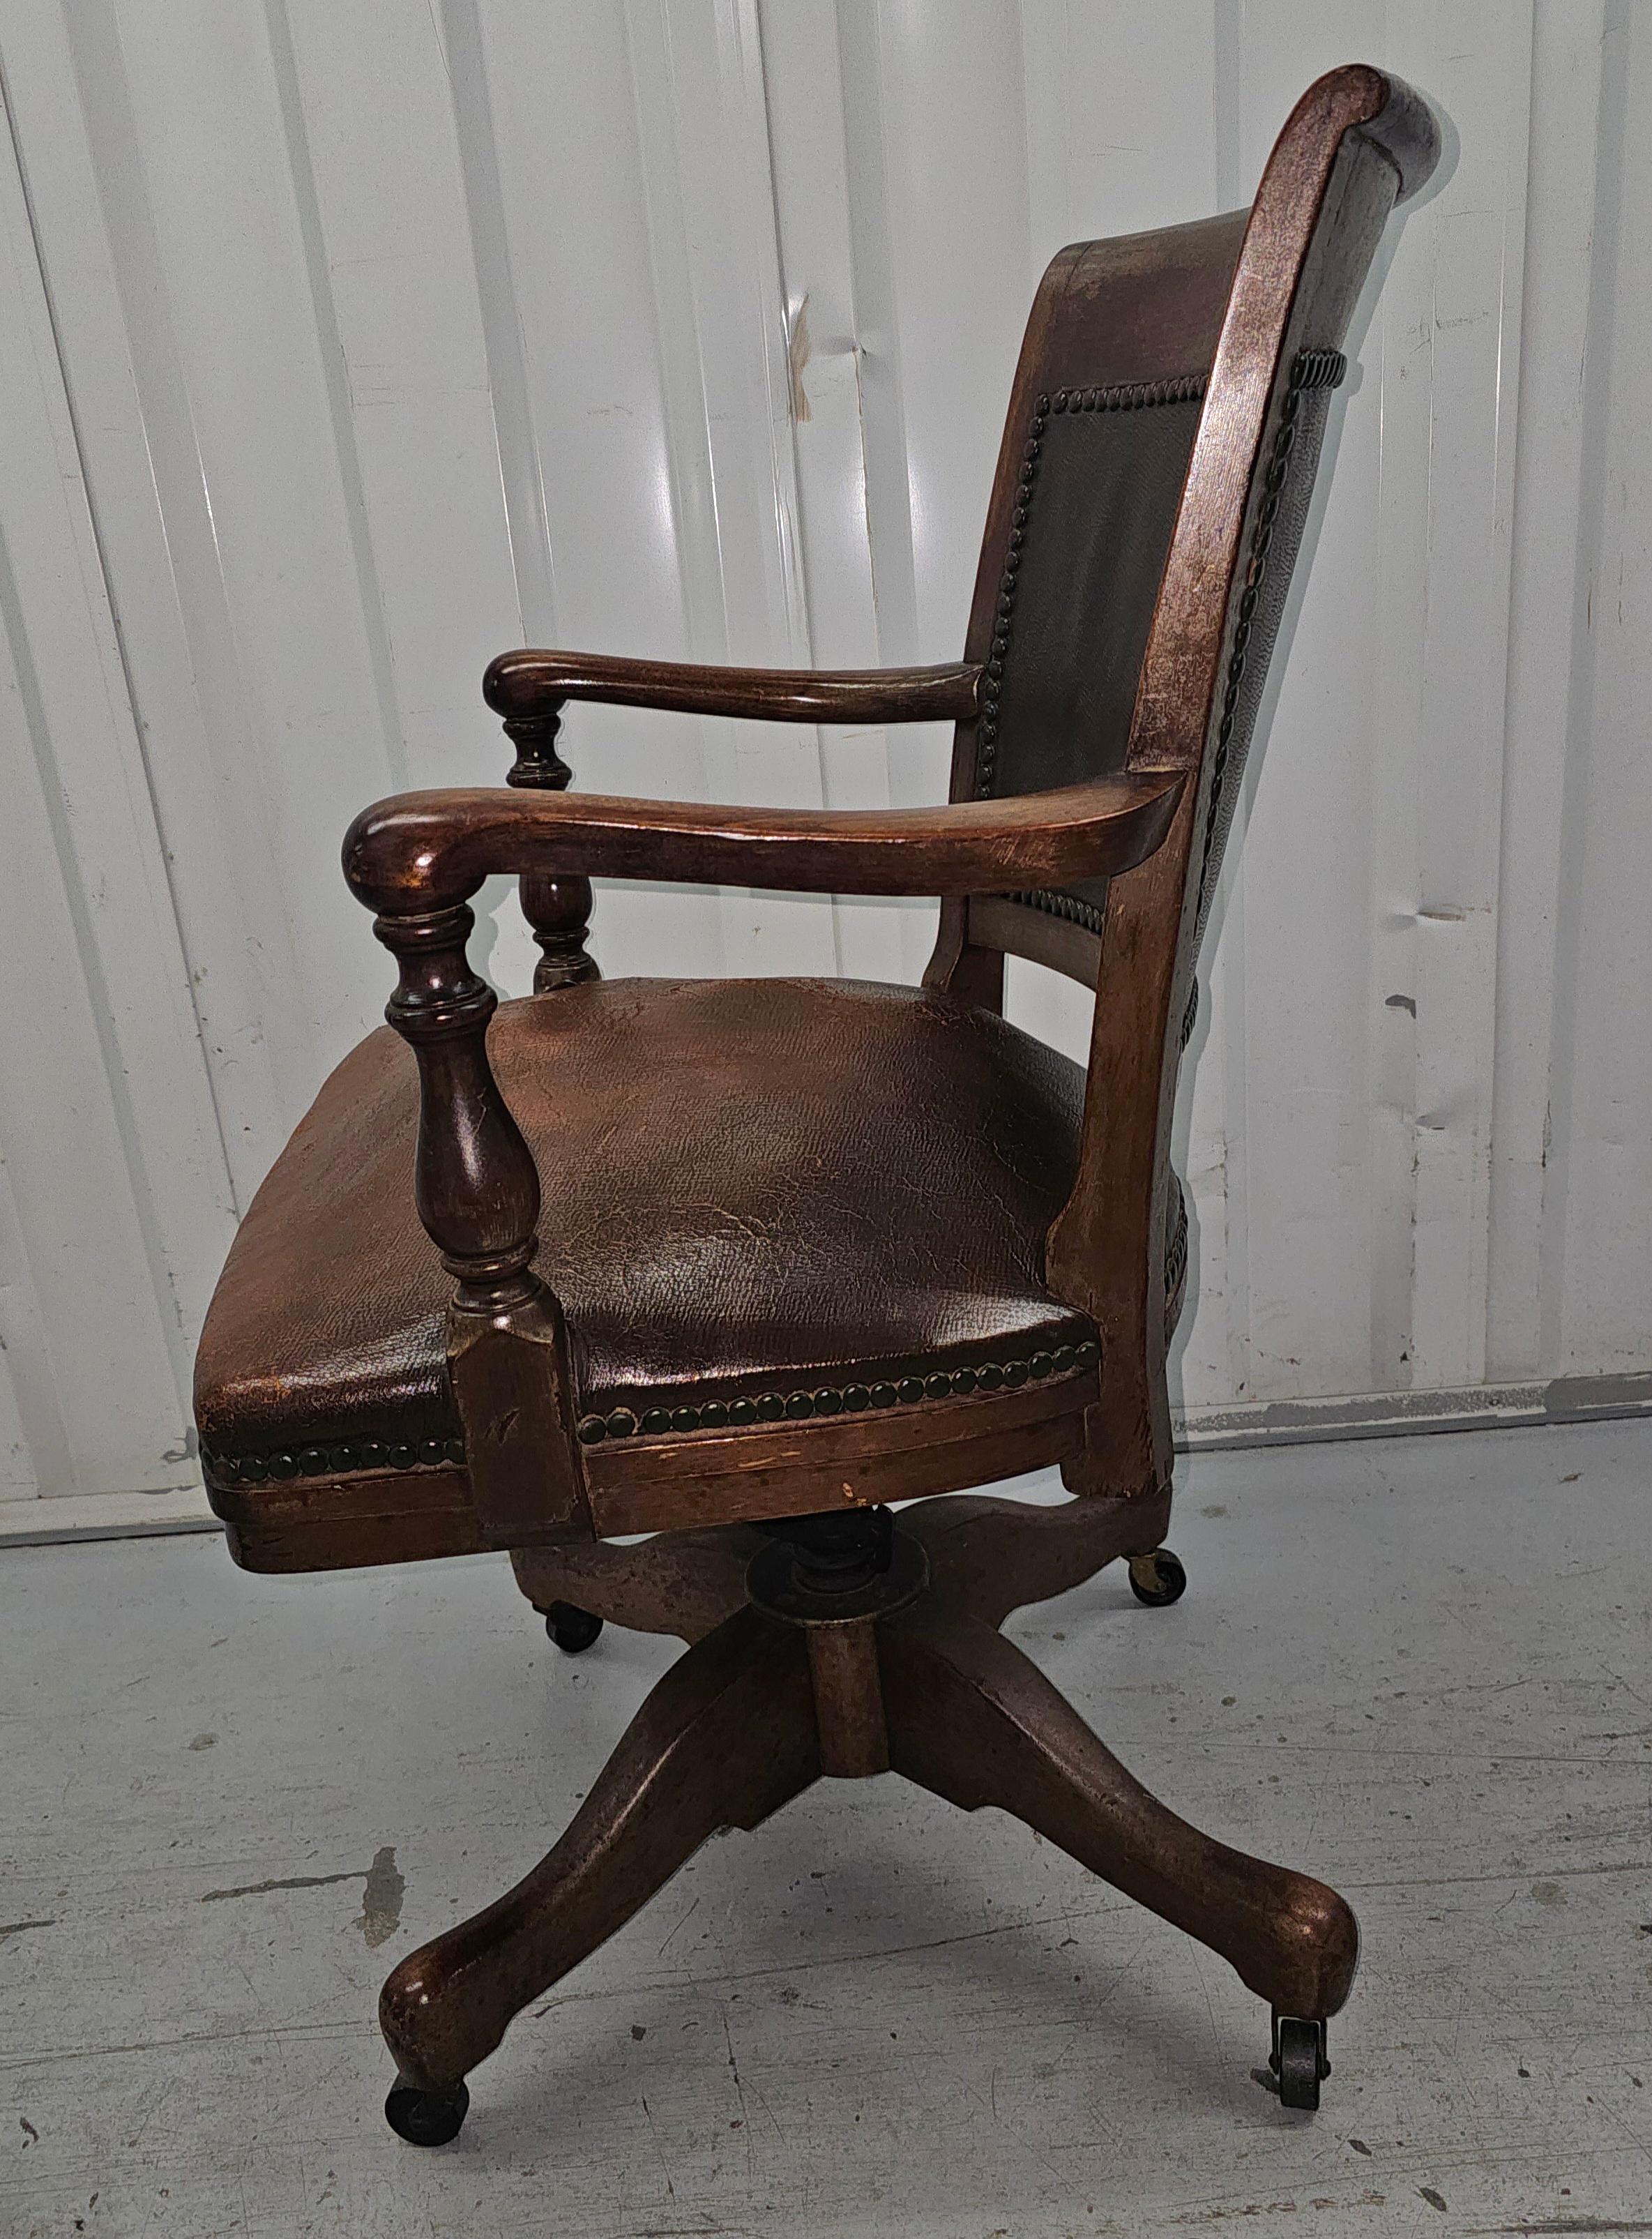 A 1900s Sikes Furniture Company Walnut and Leather Upholstered Seat and back rolling desk chair. Swivels and tilts. Firm springed seat. Beautiful nail head trims
Some wear on leather seat , but tear. Measures 24